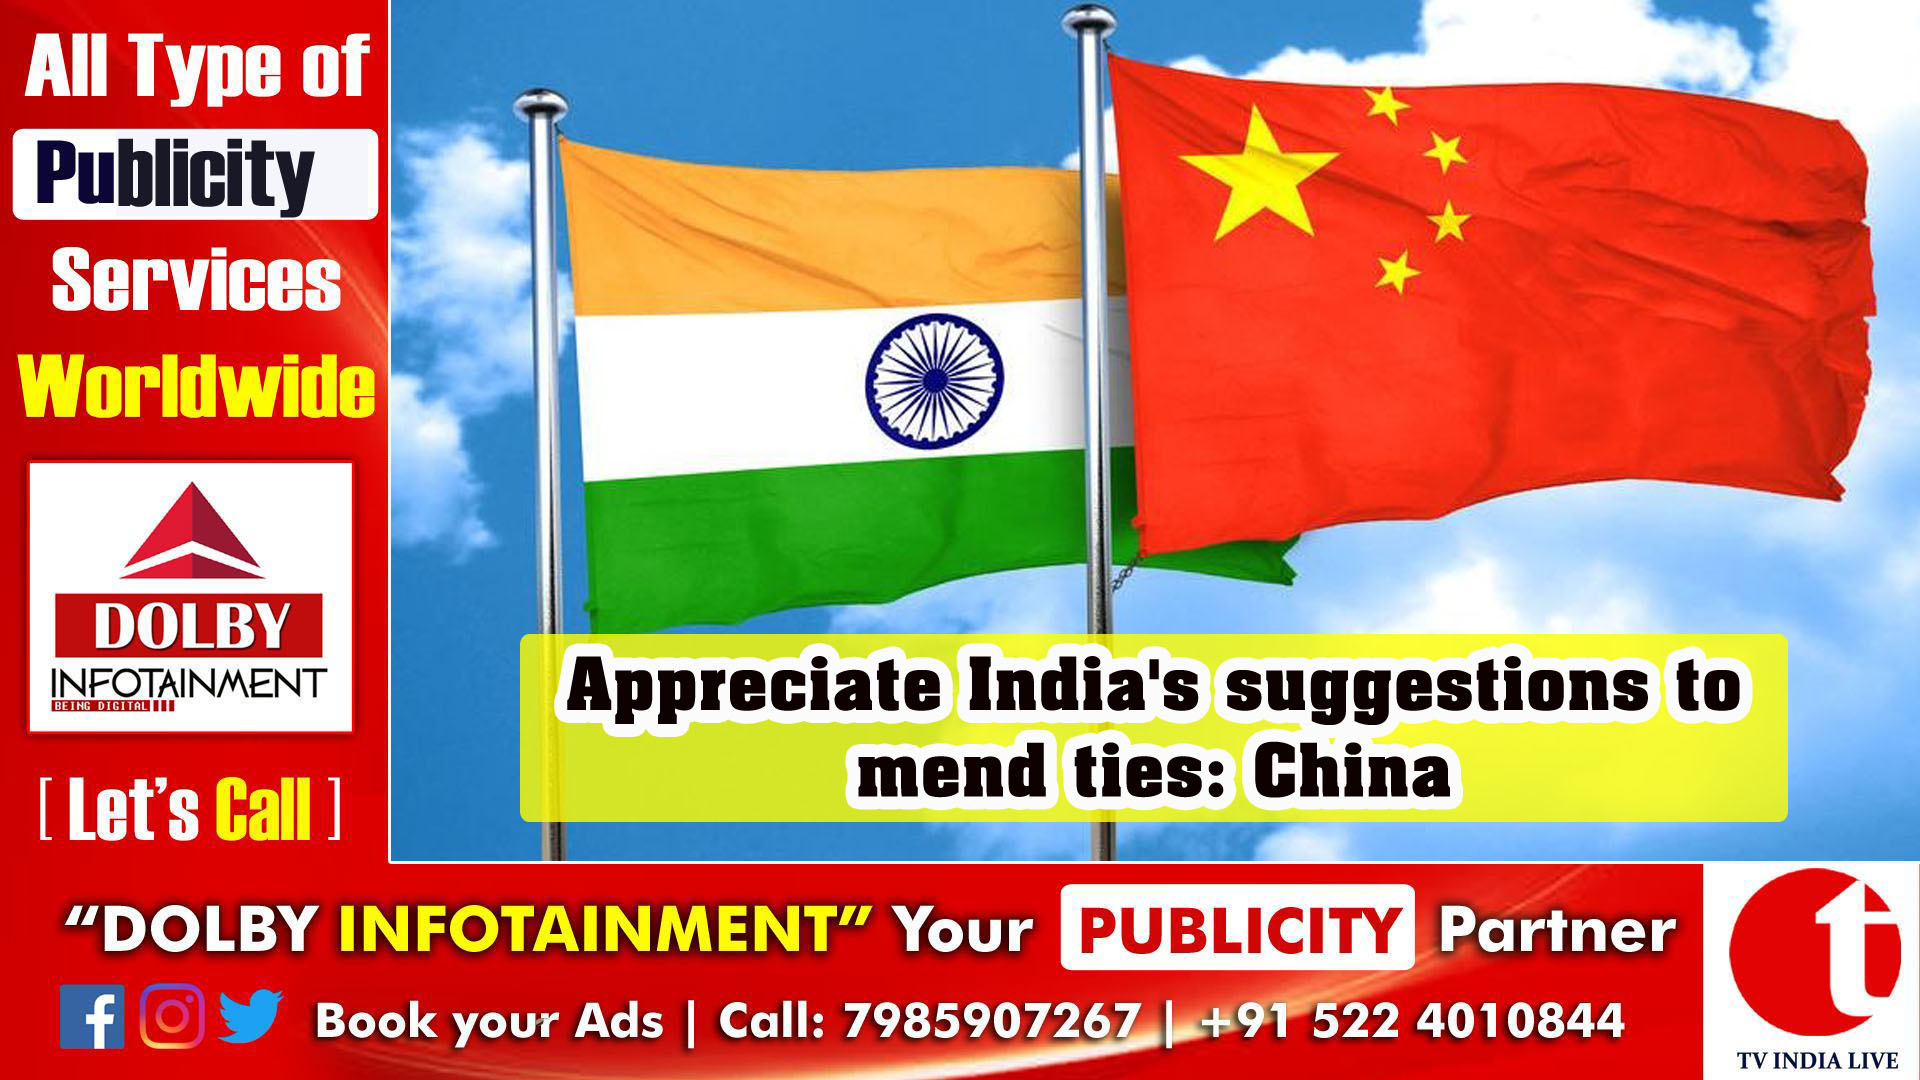 Appreciate India's suggestions to mend ties: China